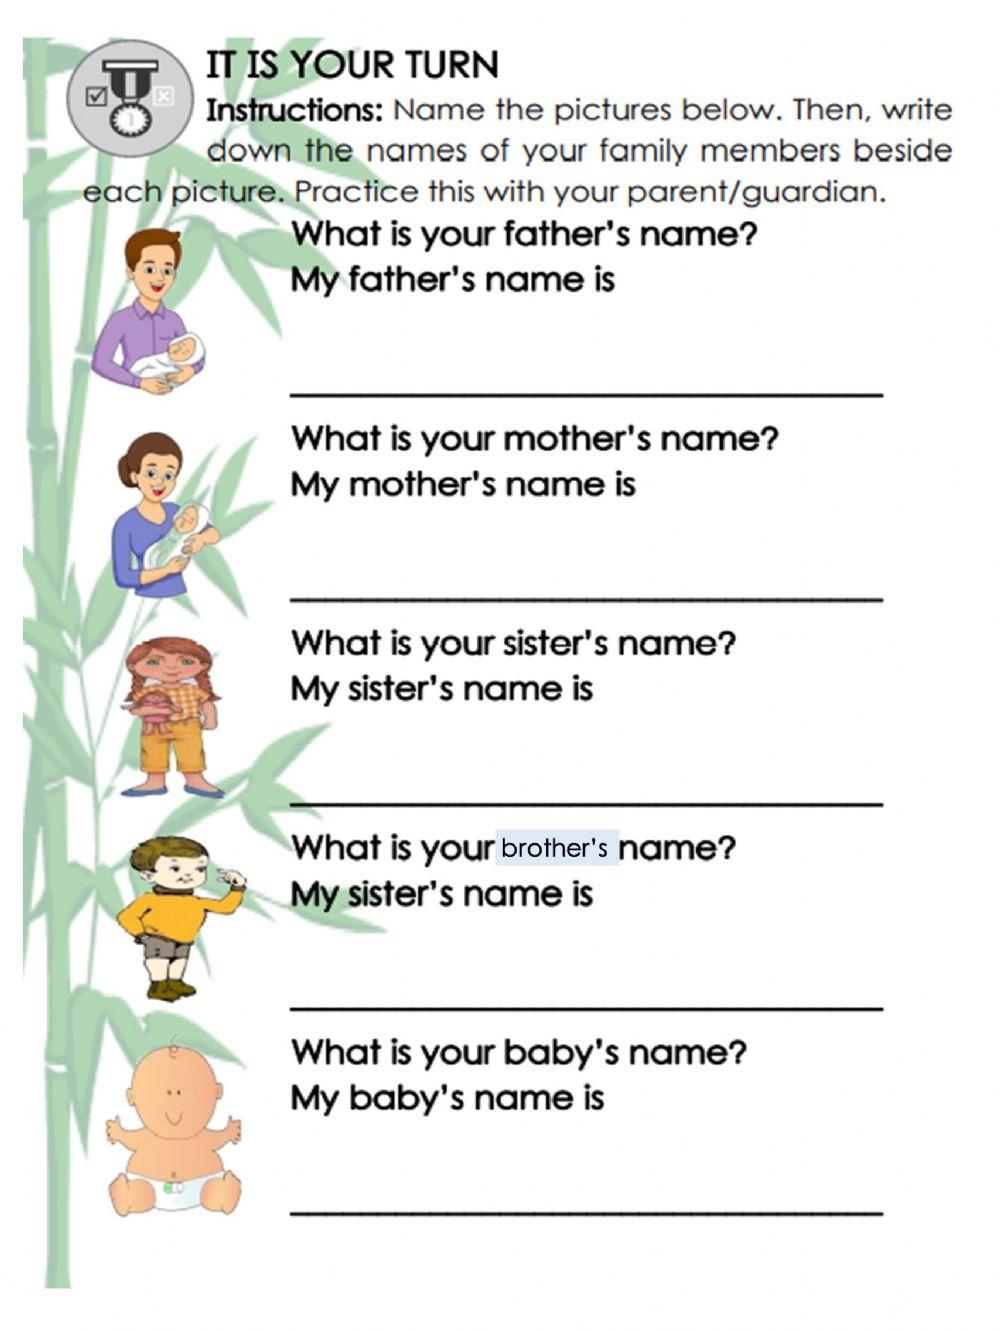 NAMING FAMILY MEMBERS-ASSIGNMENT